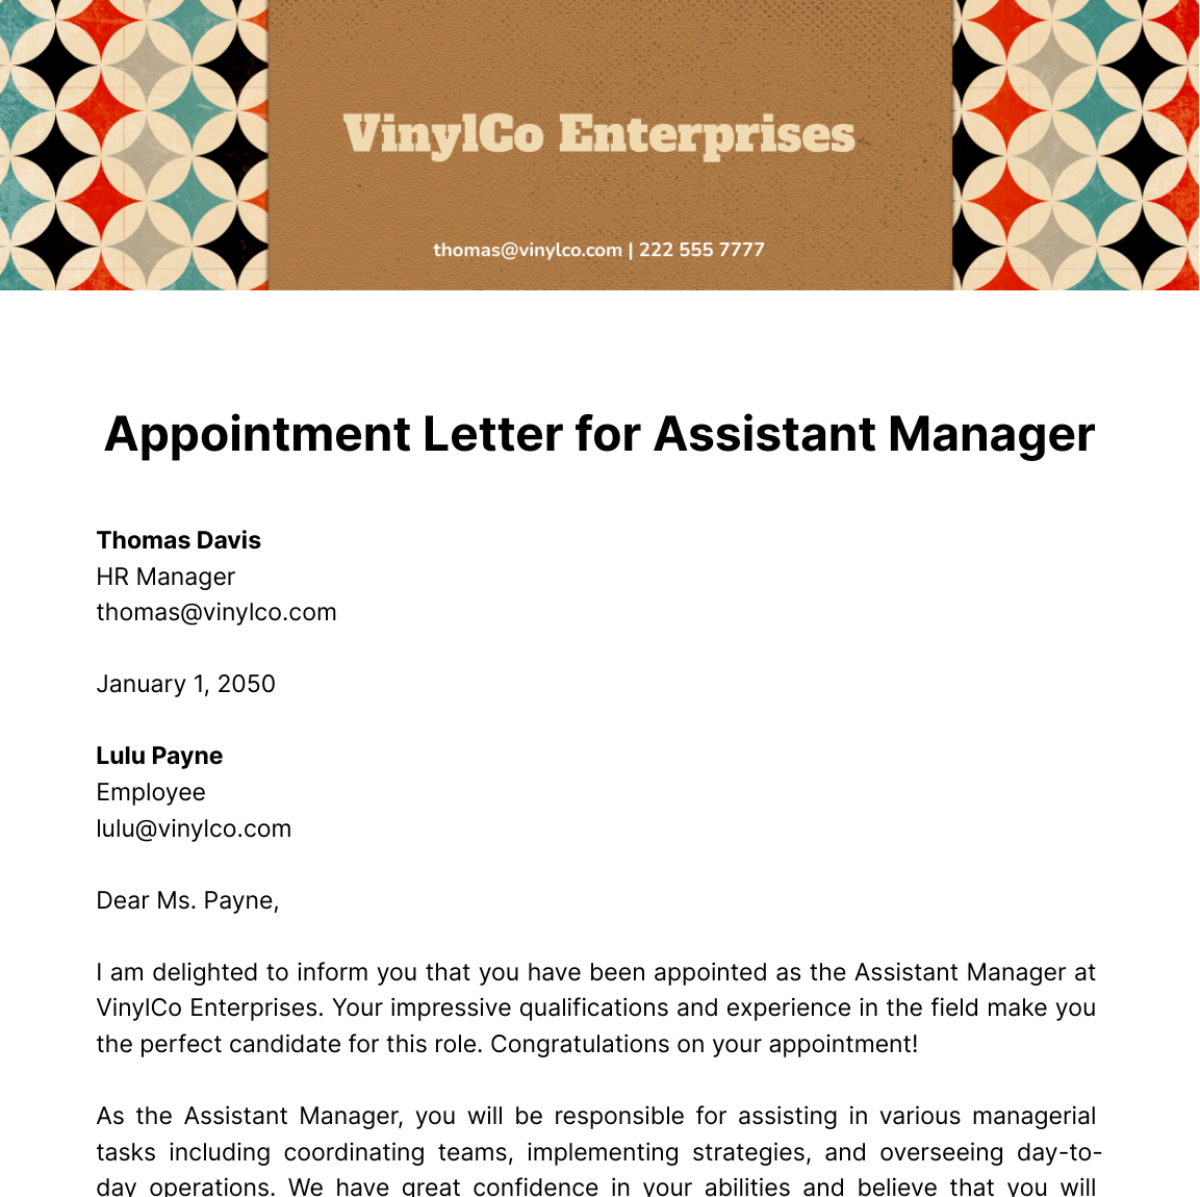 Appointment Letter for Assistant Manager Template